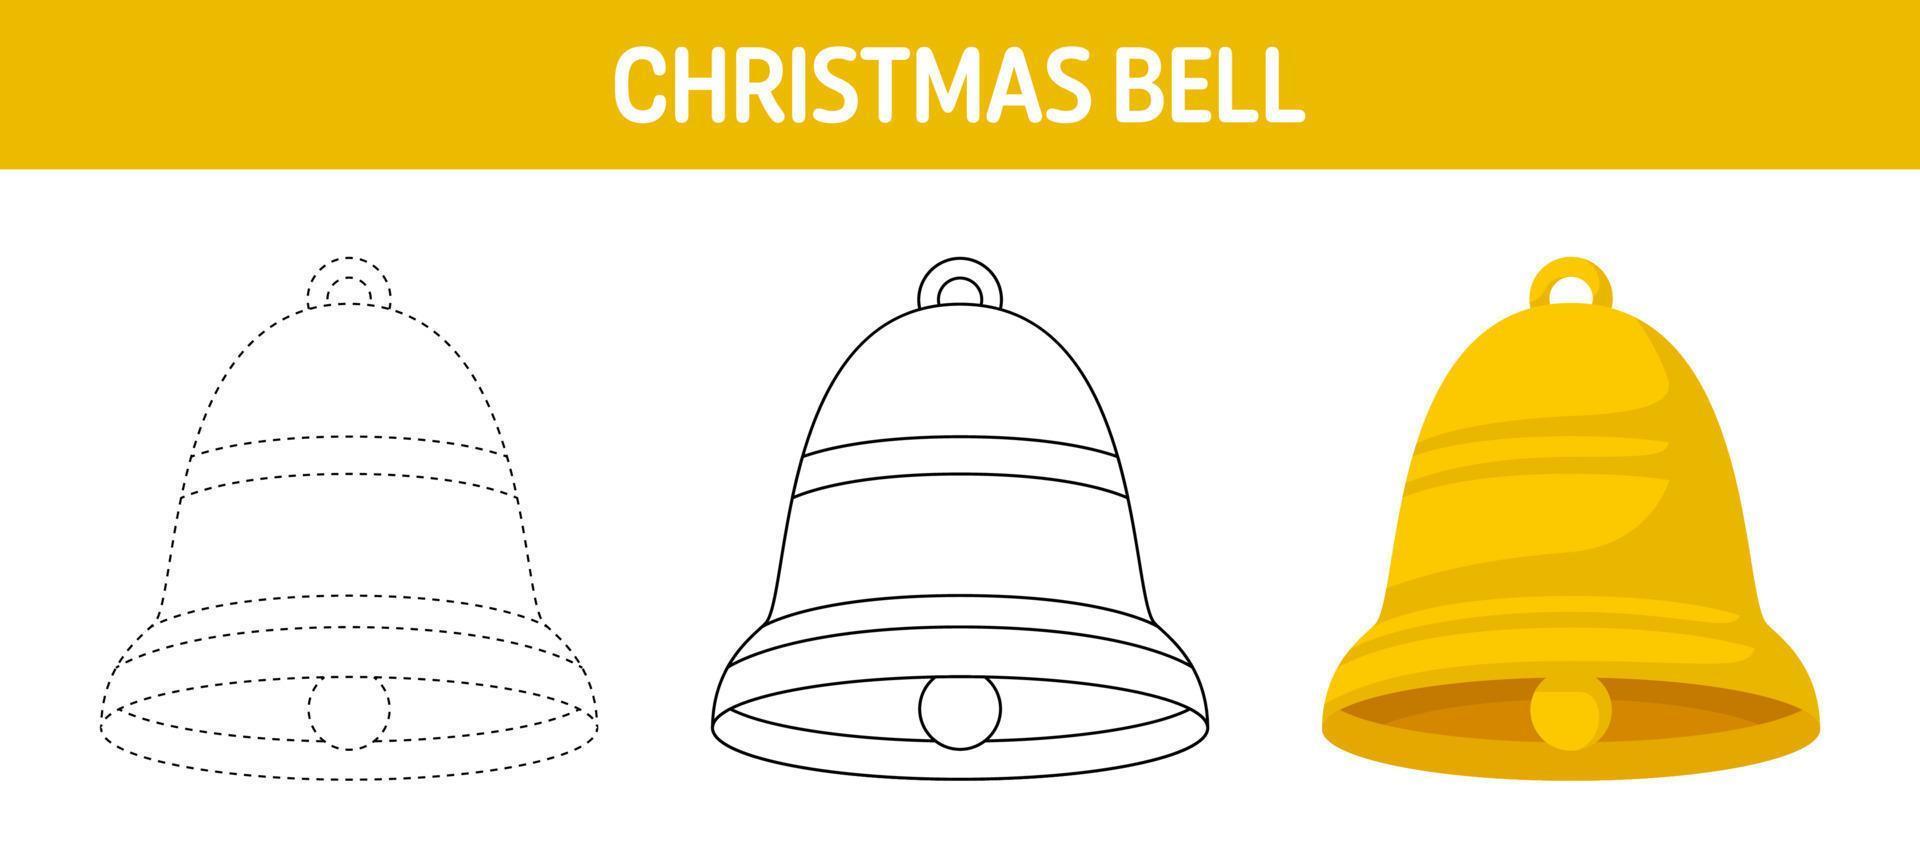 Christmas Bell tracing and coloring worksheet for kids vector